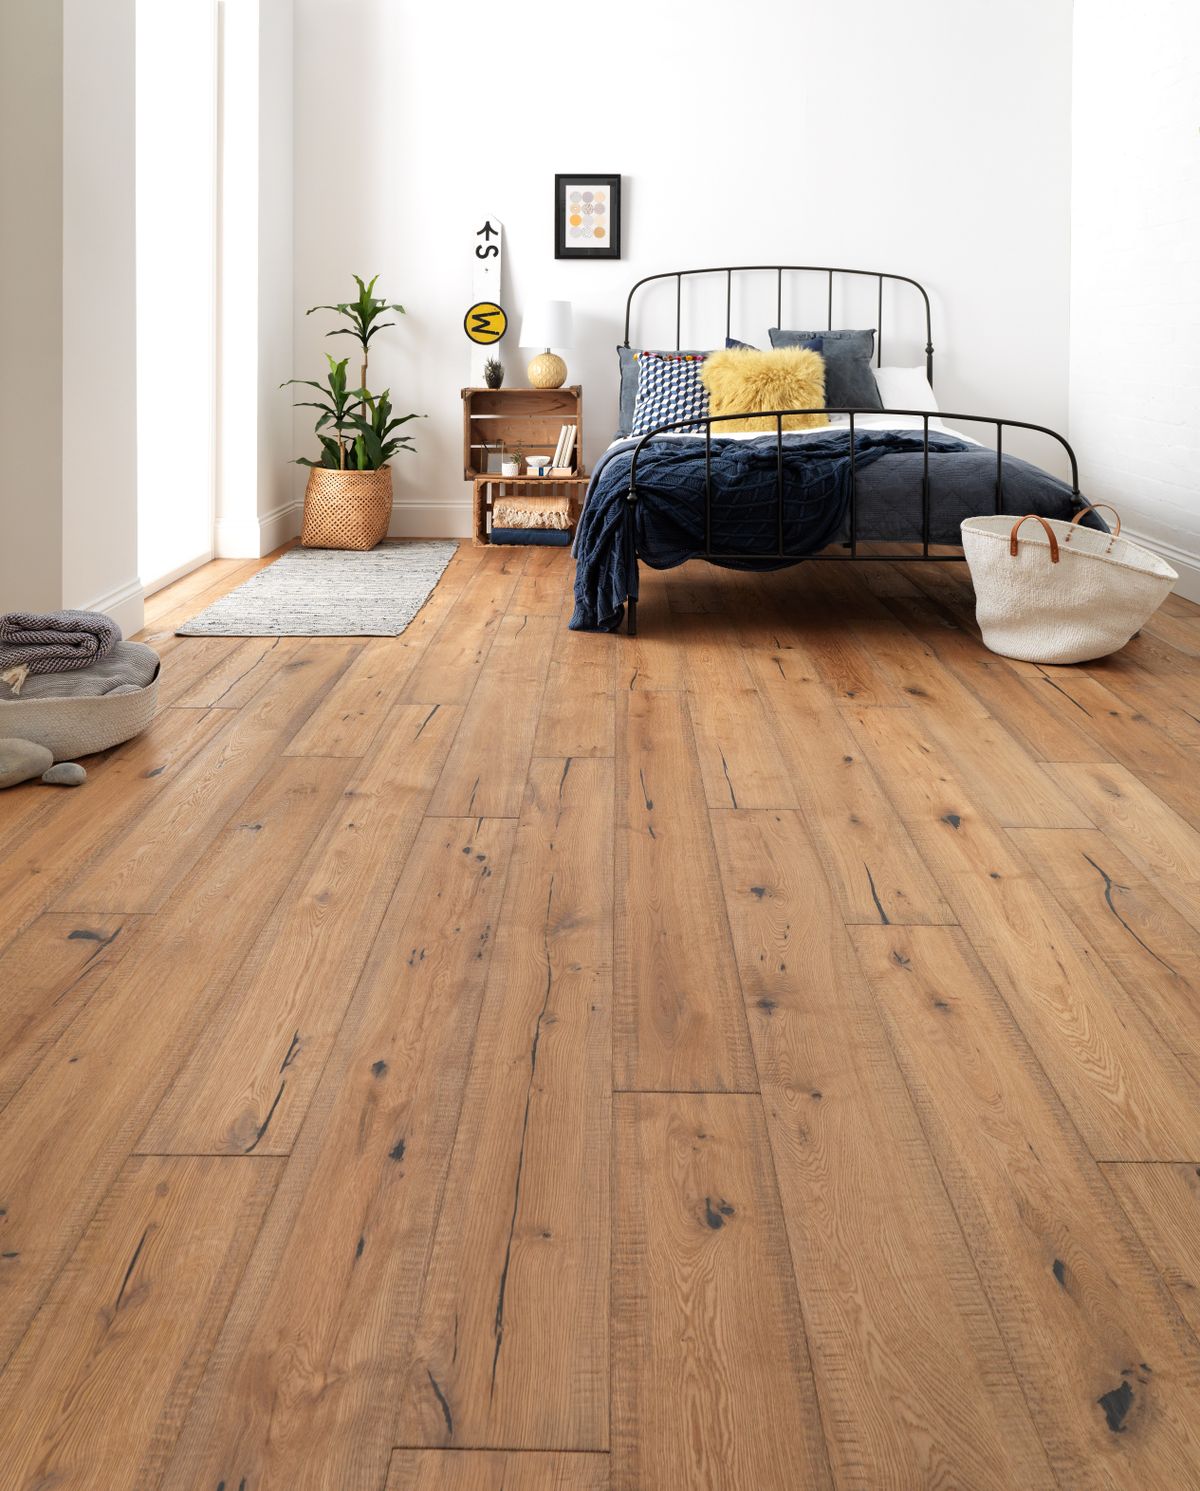 11 types of flooring materials to consider for your home – the pros and cons  | Real Homes